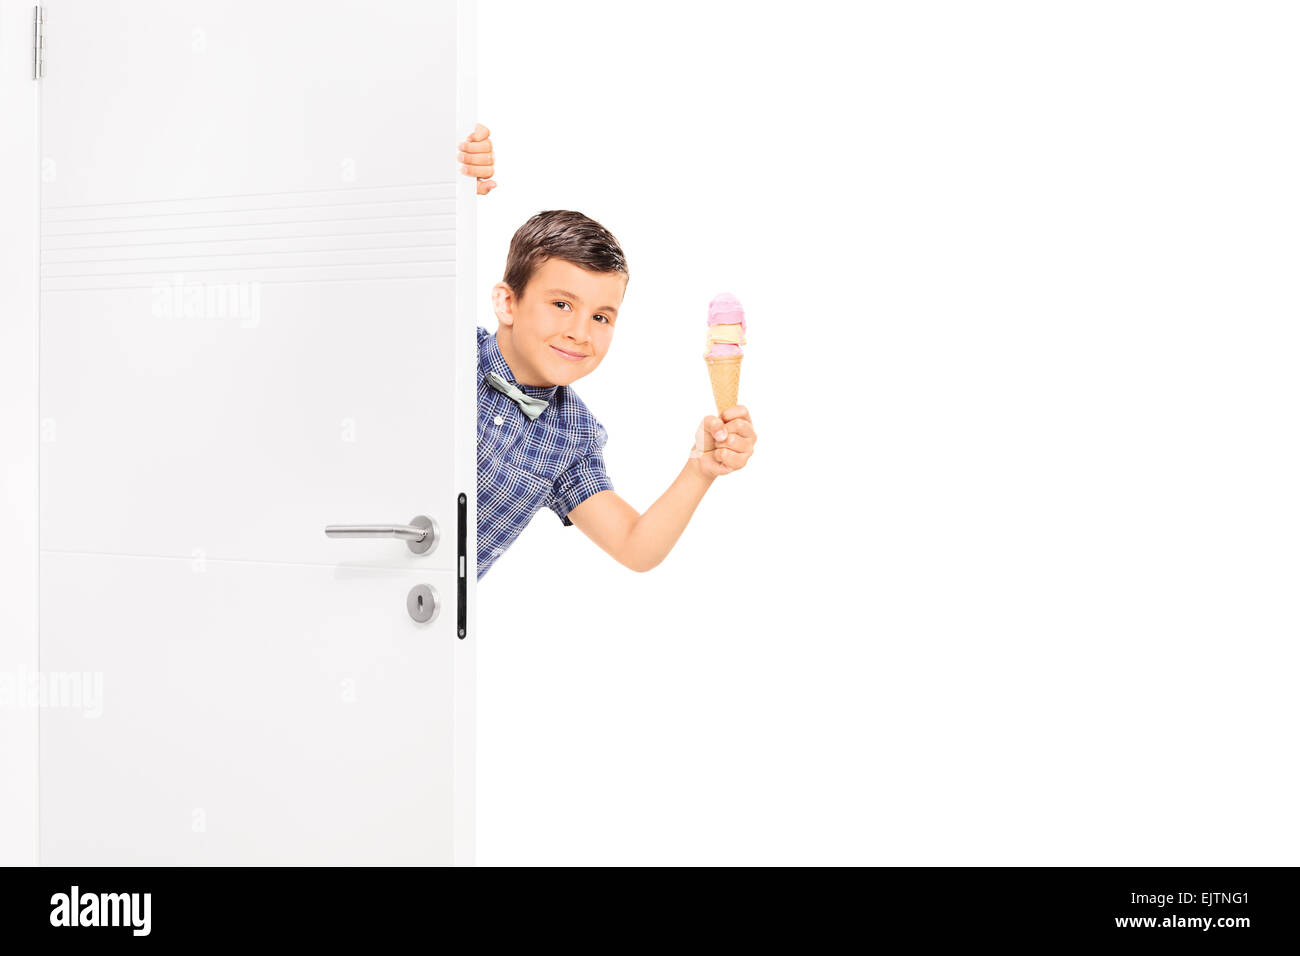 Little boy holding and ice cream behind a white door and looking at the camera isolated on white background Stock Photo